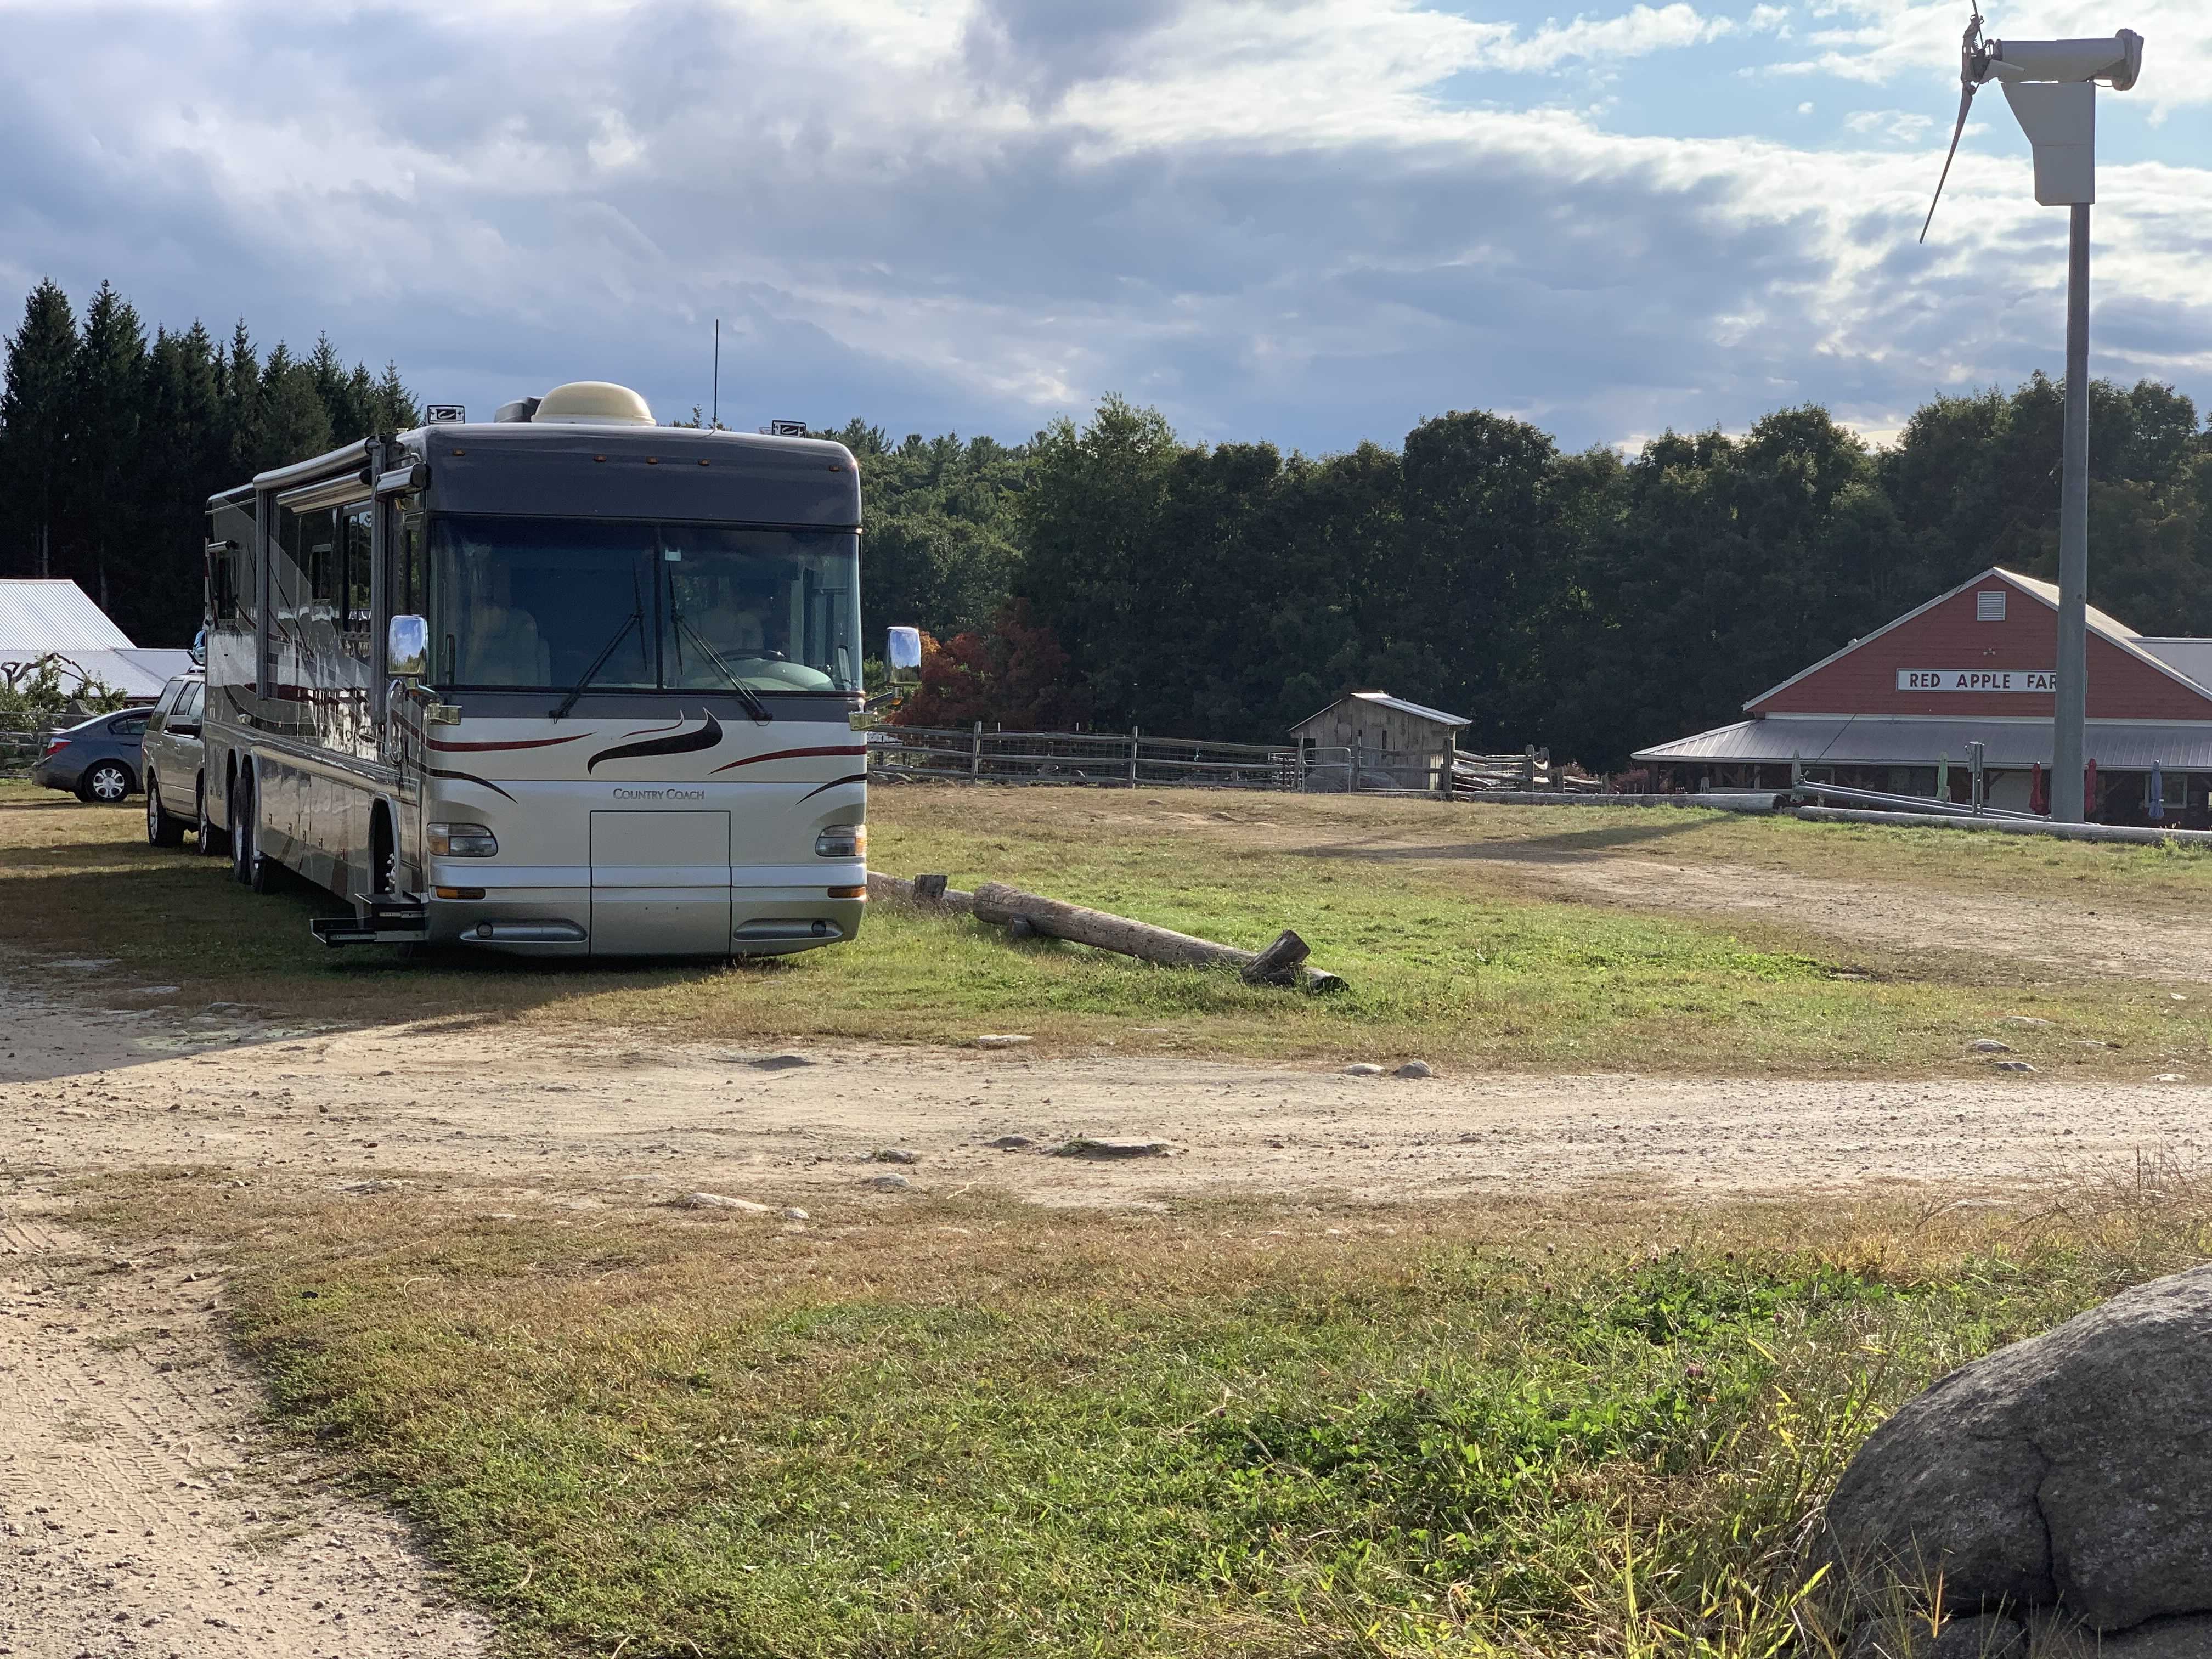 Red Apple Farm of Massachusetts is the perfect place for you fall RV camping adventures.